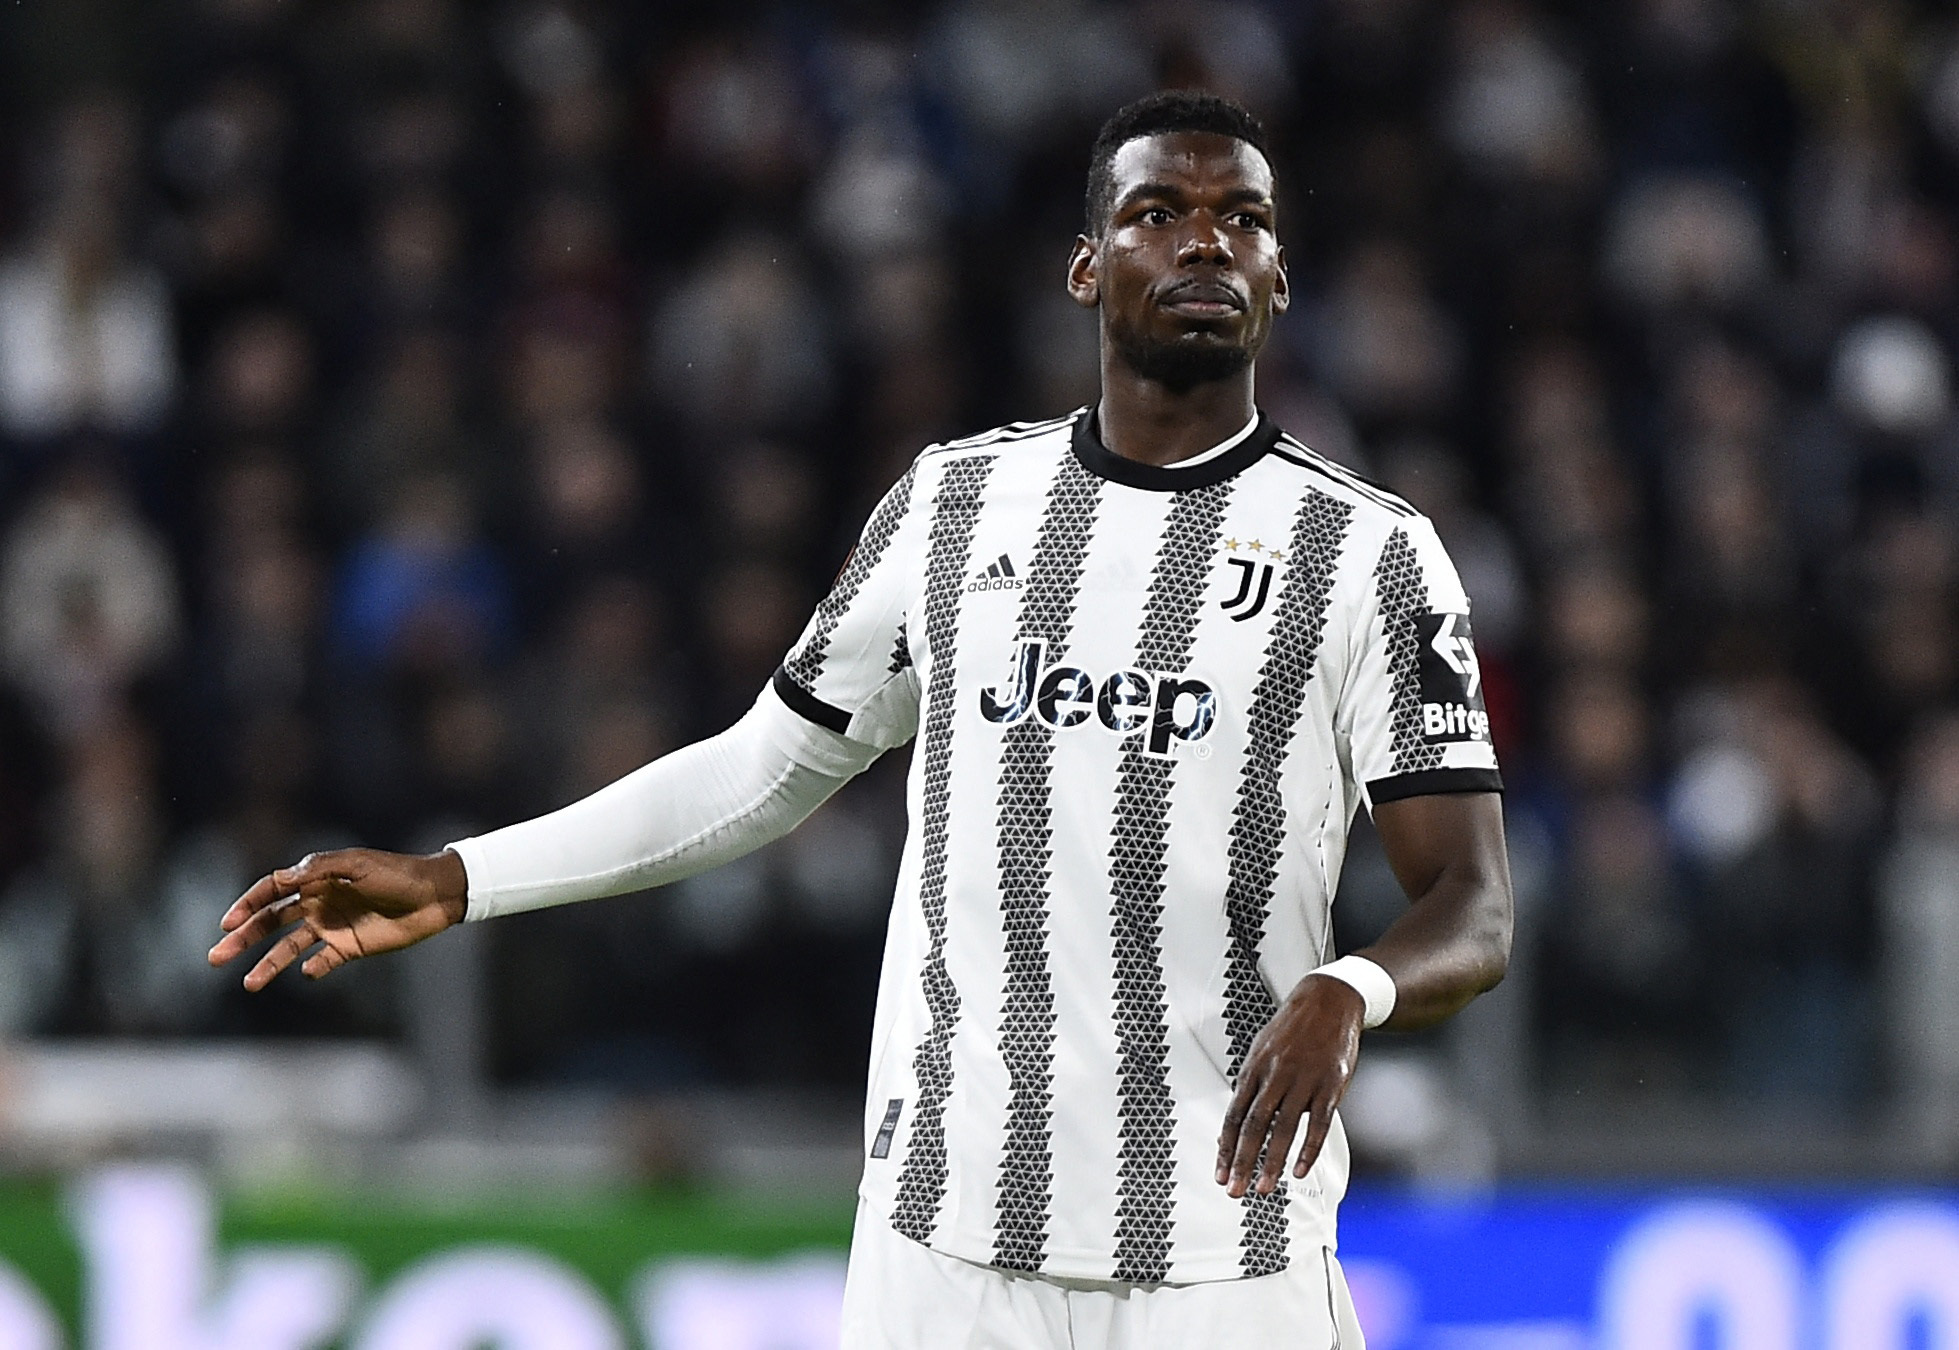 Italy's sports prosecutors request 4-year ban for Pogba - media